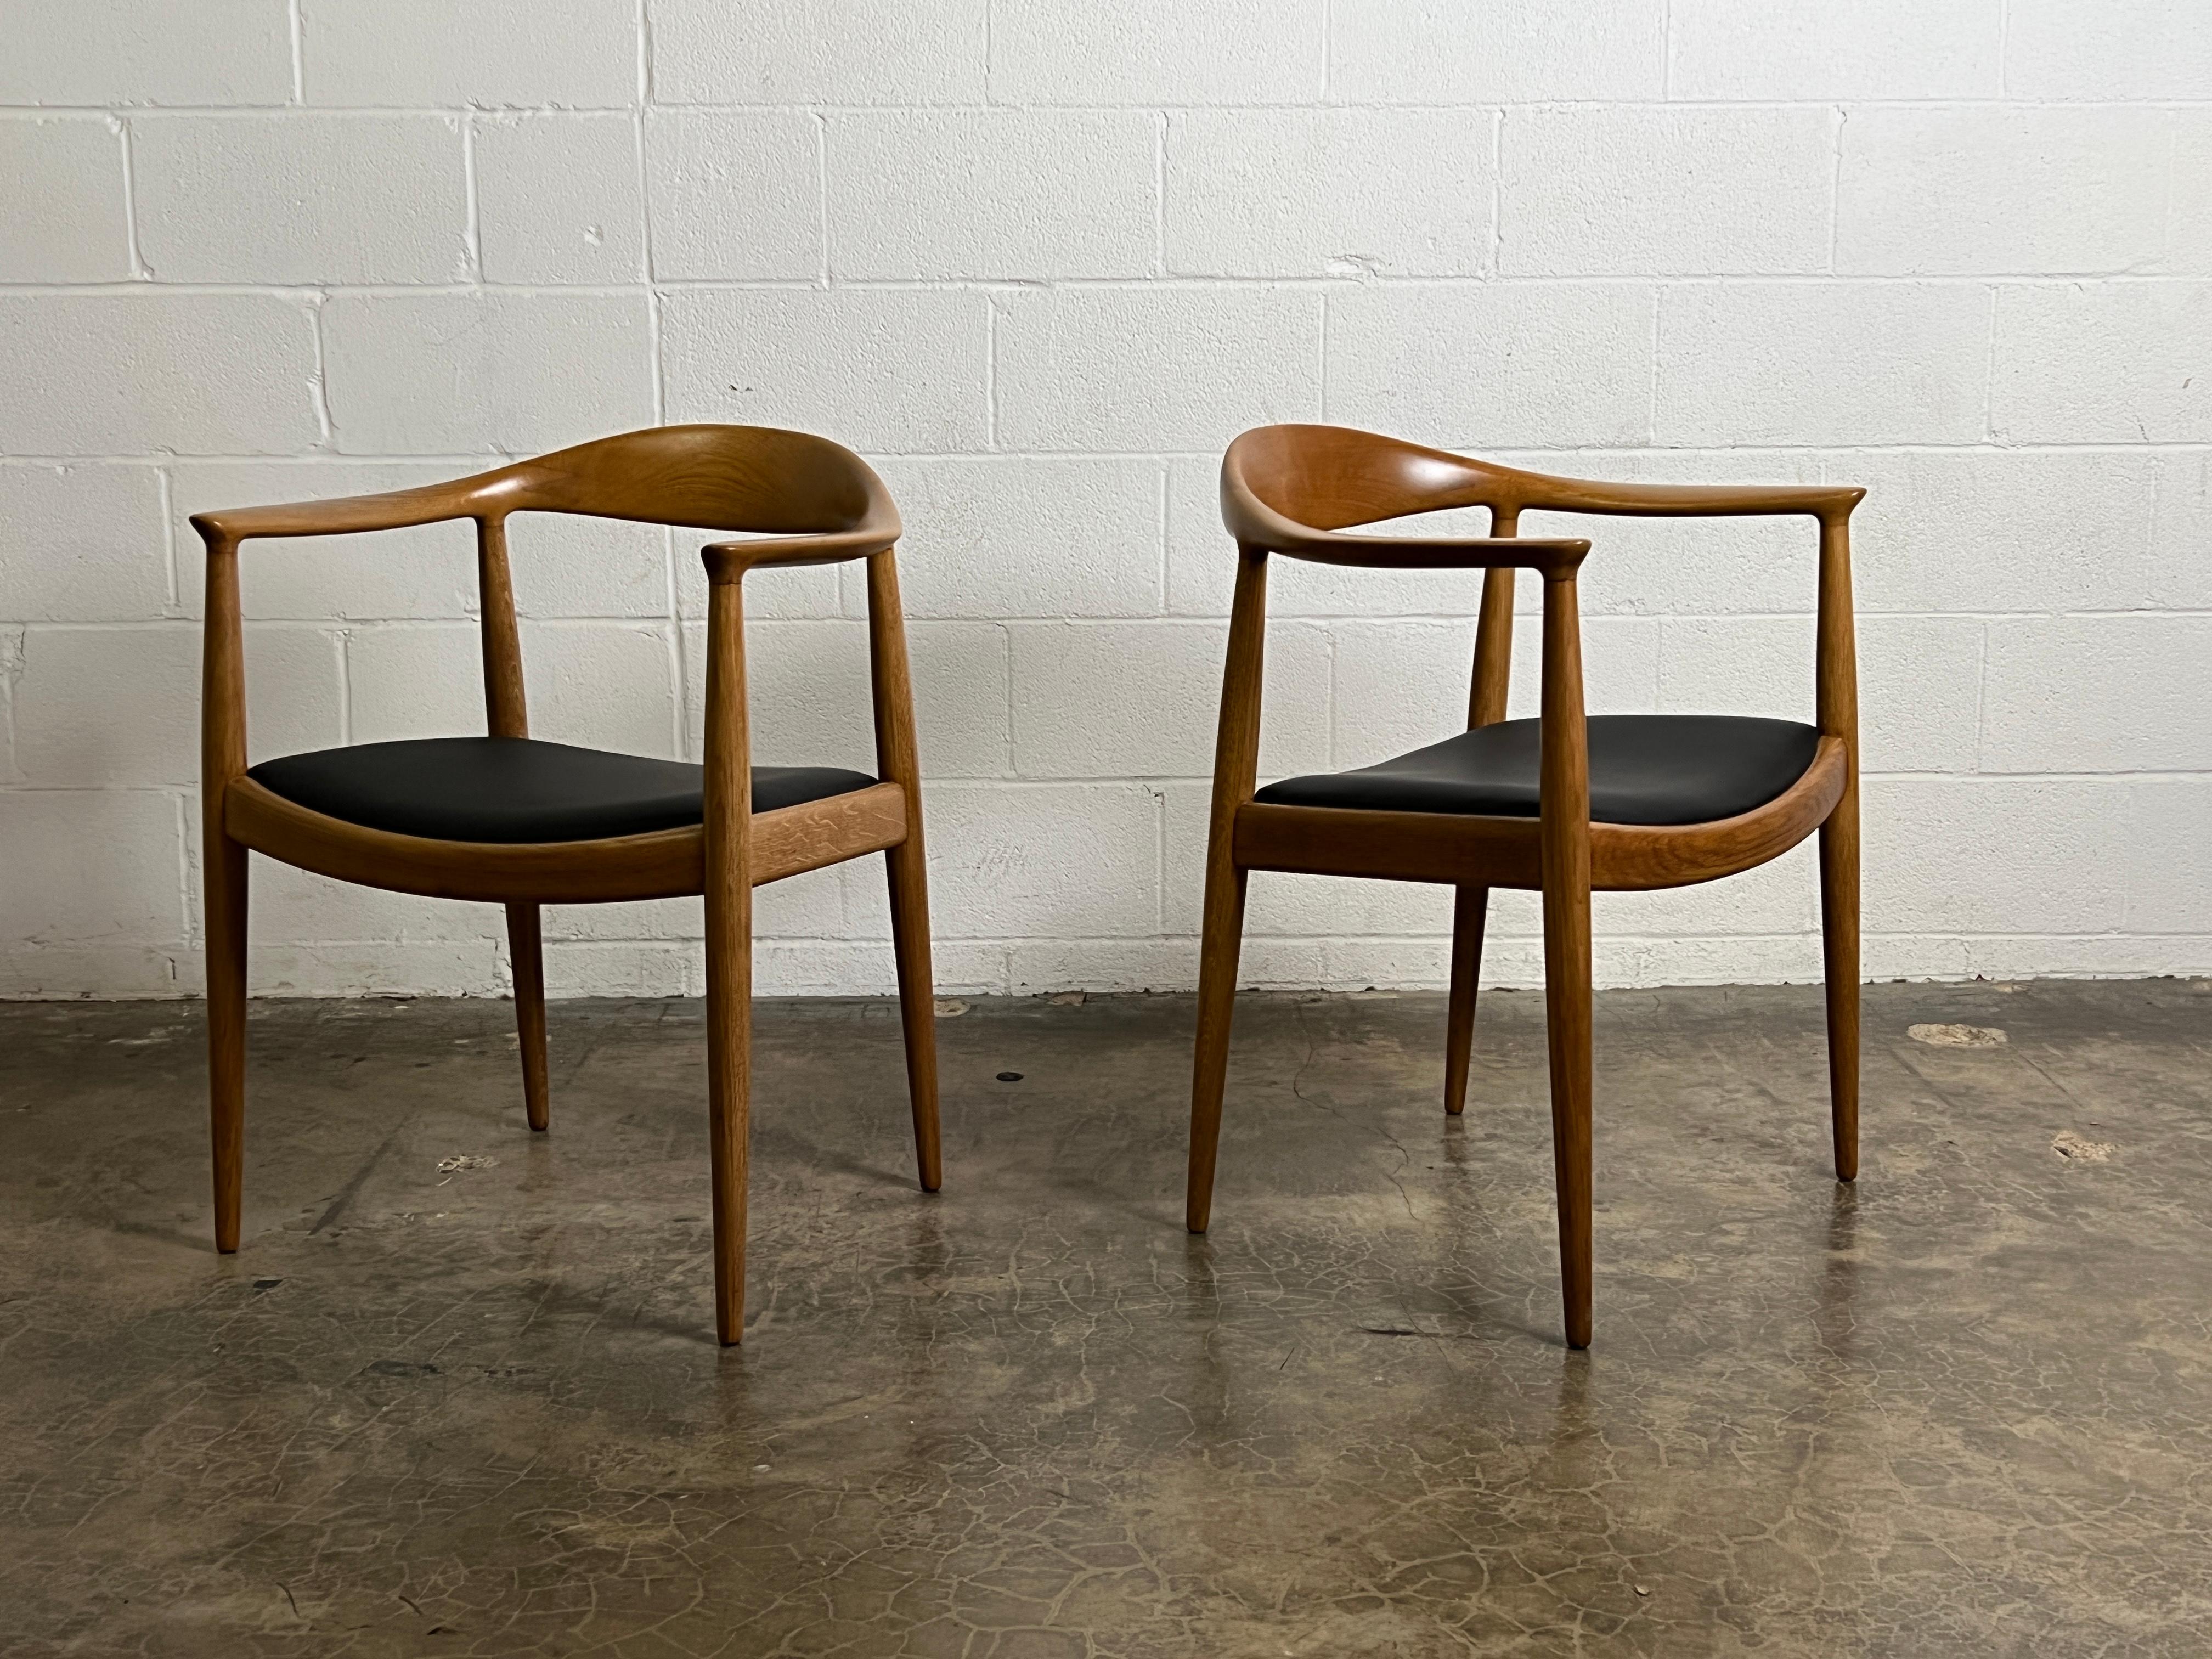 A pair of oak and leather round chairs designed by Hans Wegner for Johannes Hansen.